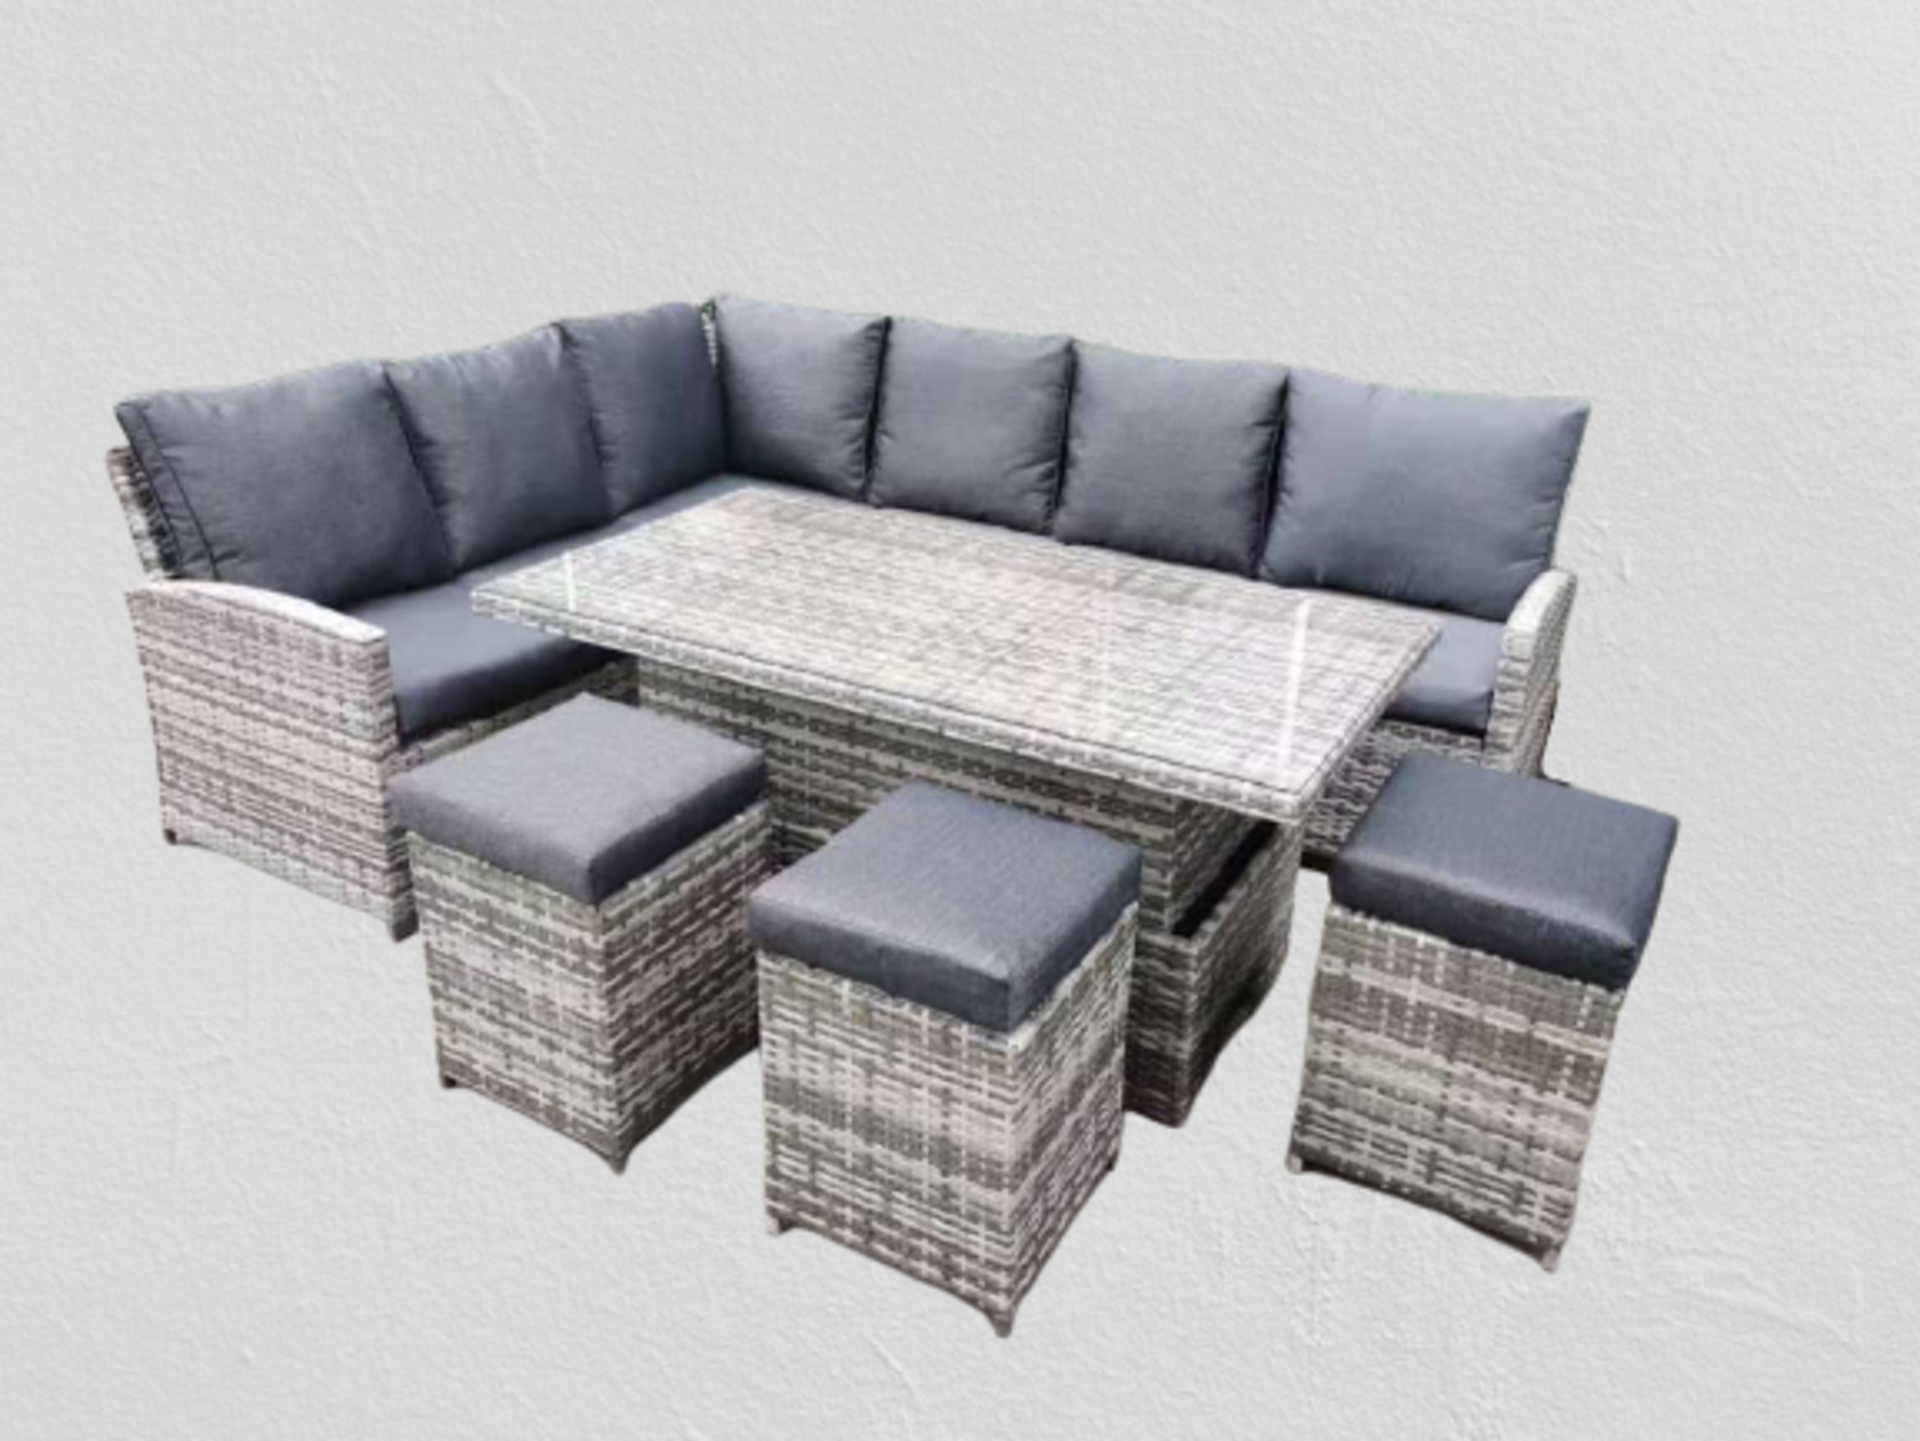 * Windsor Rise and Fall Rattan Sofa Set - Alu frame with cover - Glass table with 5mm clear glass